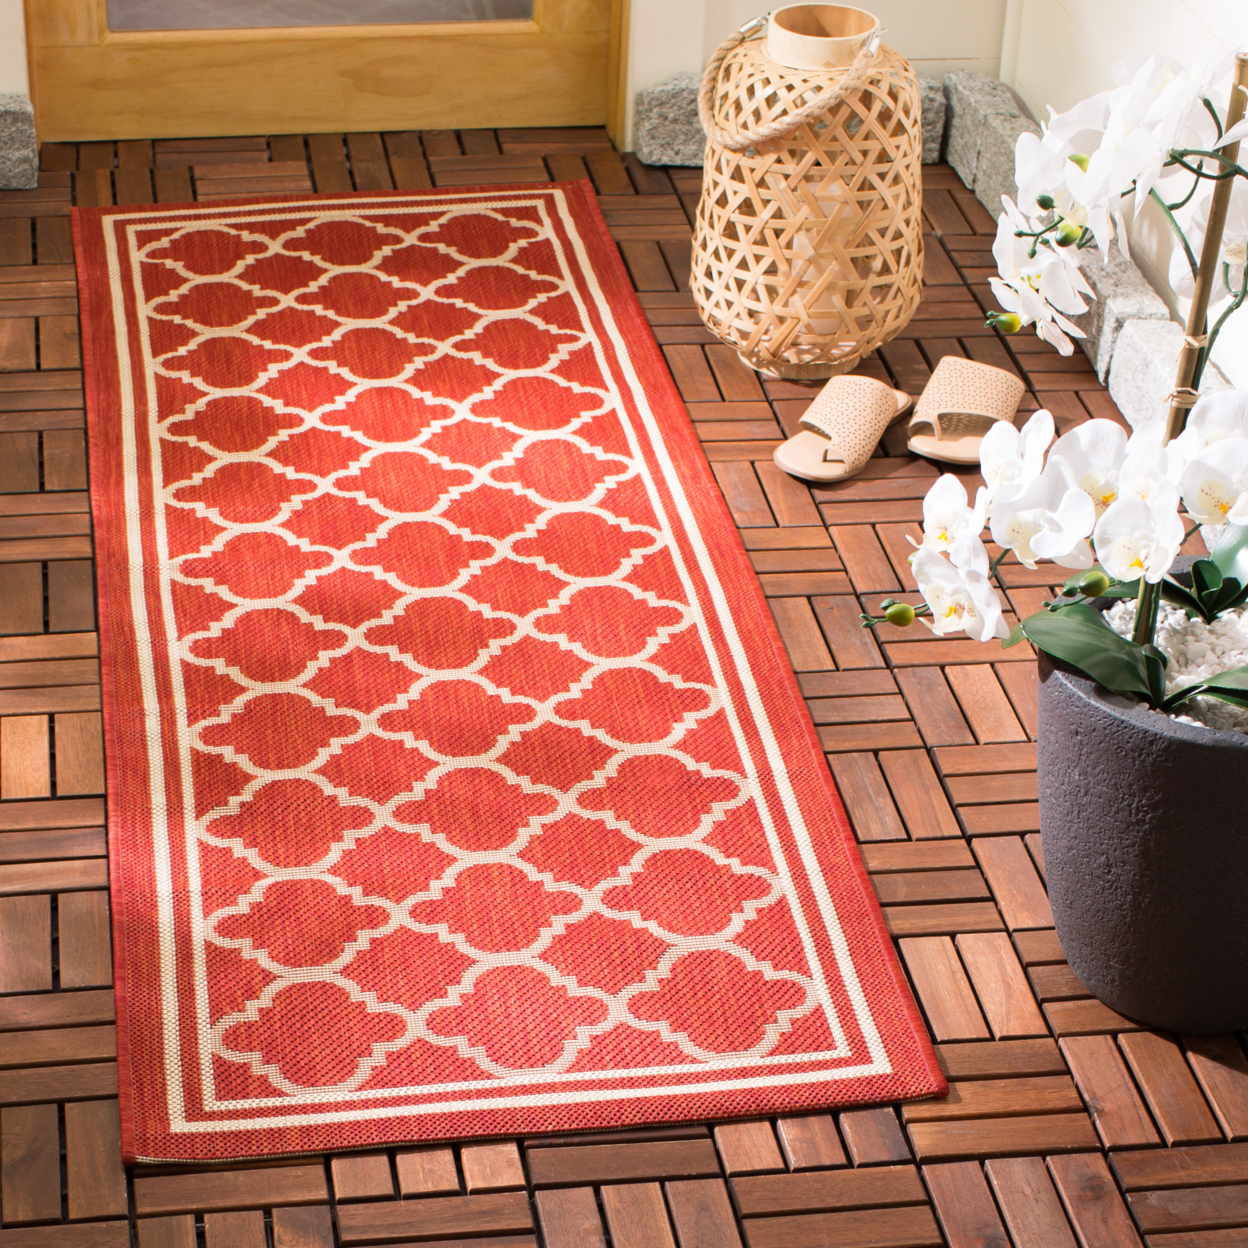 SAFAVIEH Outdoor CY6918-248 Courtyard Collection Red / Bone Rug - 2' 3 X 14'